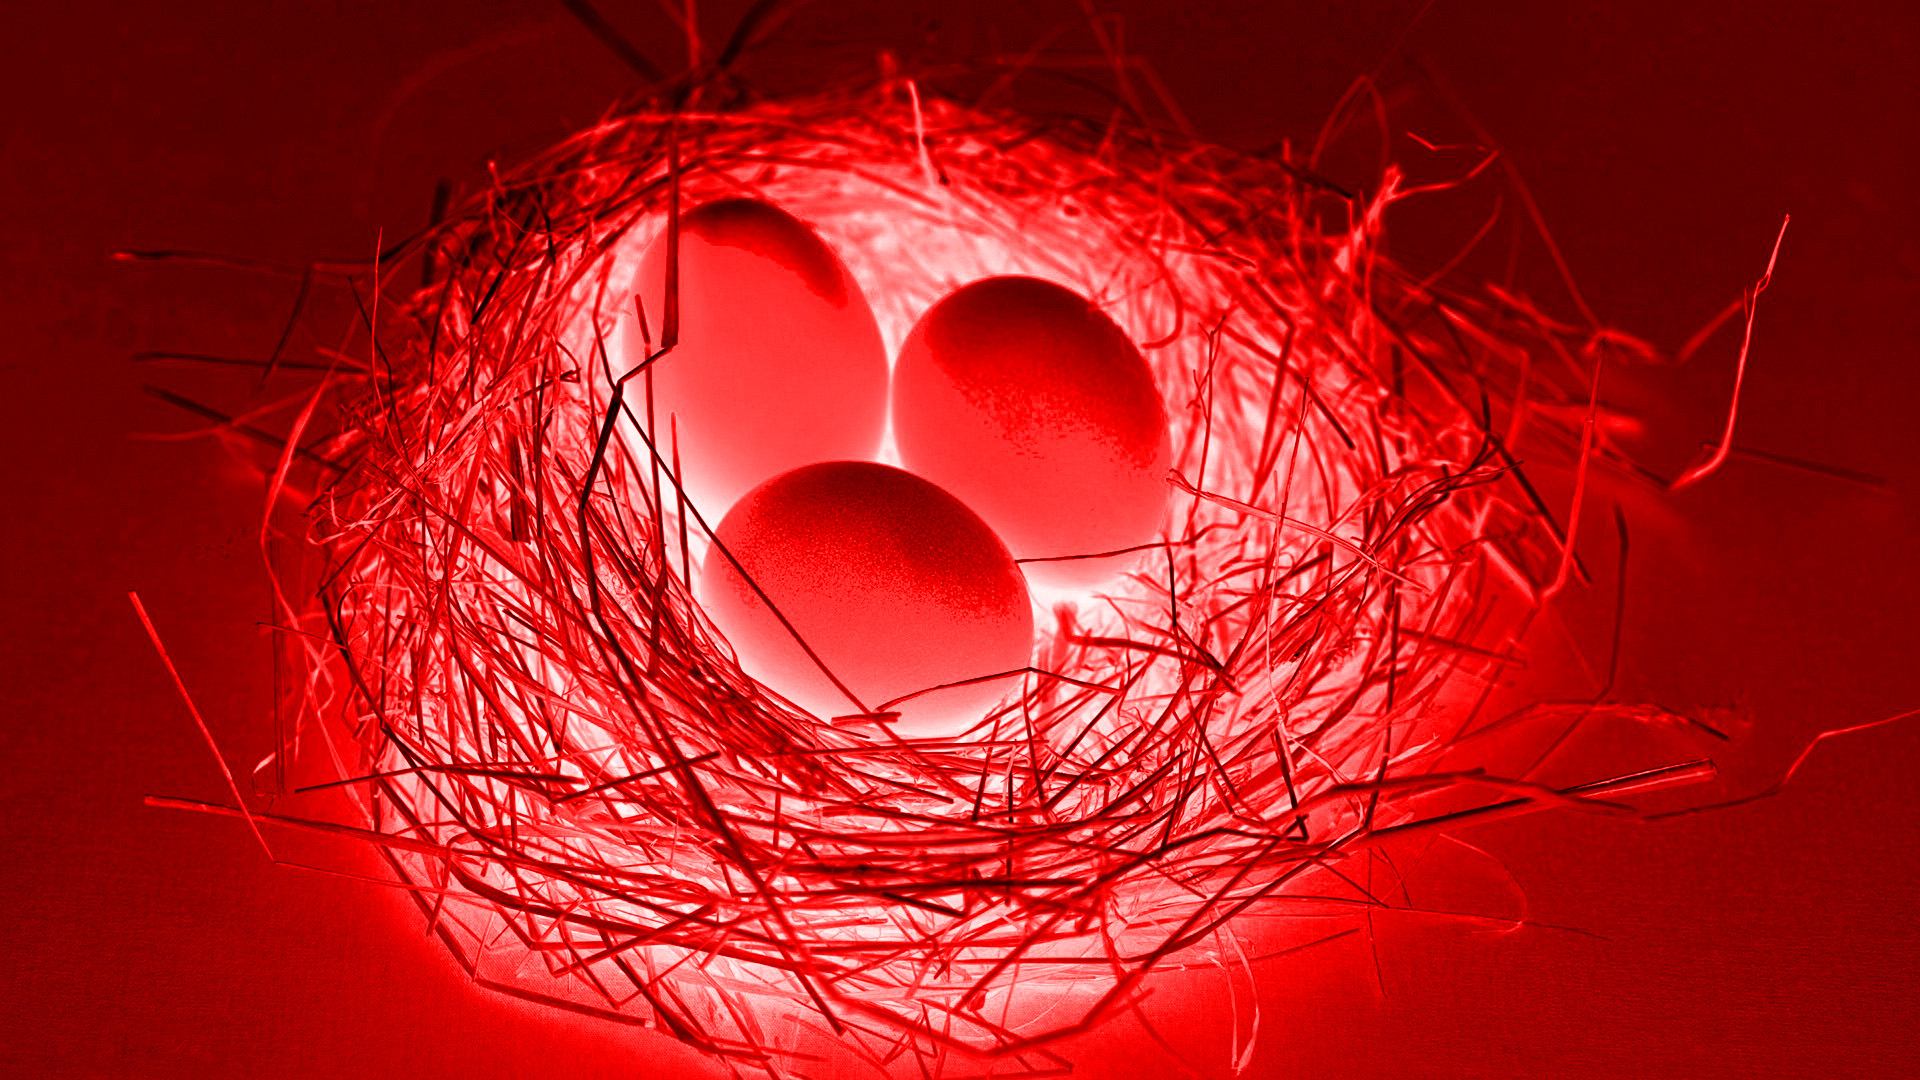 Abstract Colors Egg Red 1920x1080